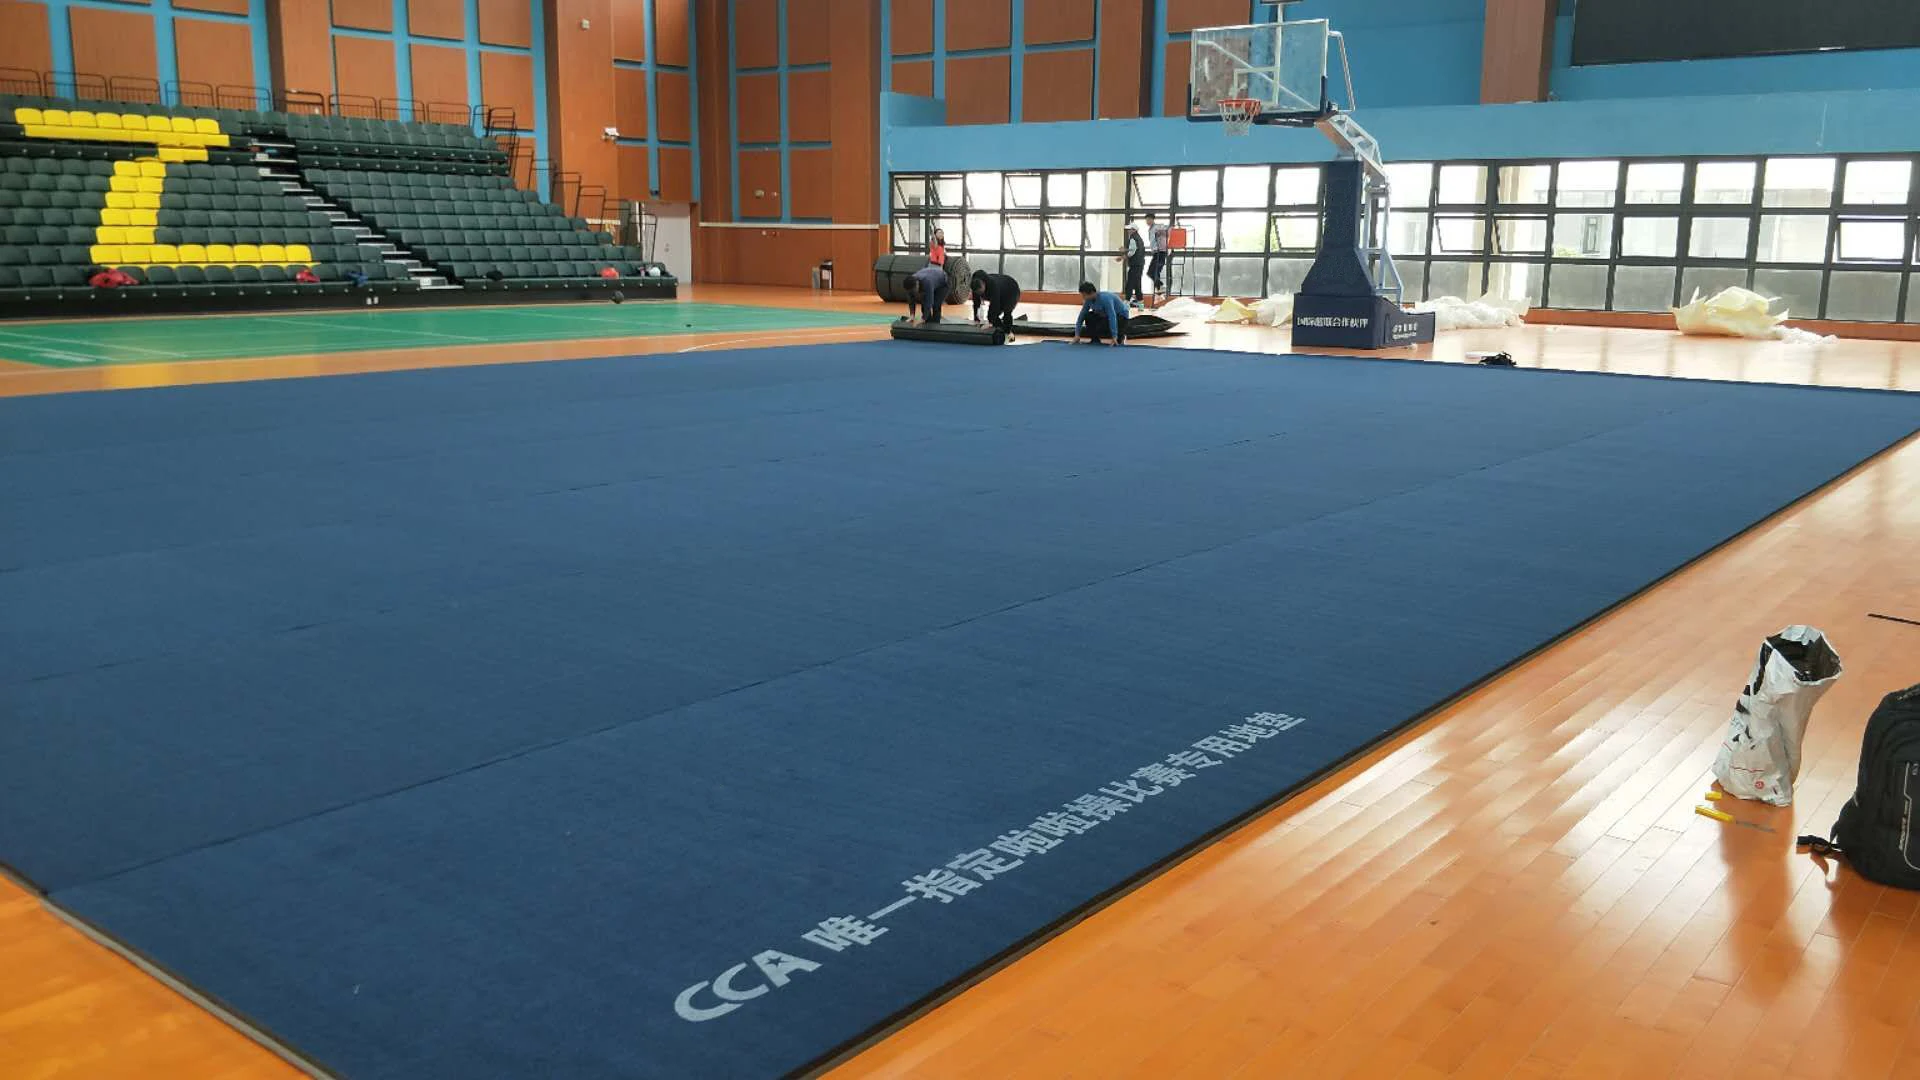 2019 New Case Cheap Price Flexi Gymnastic Roll Cheerleading Mats For Sale